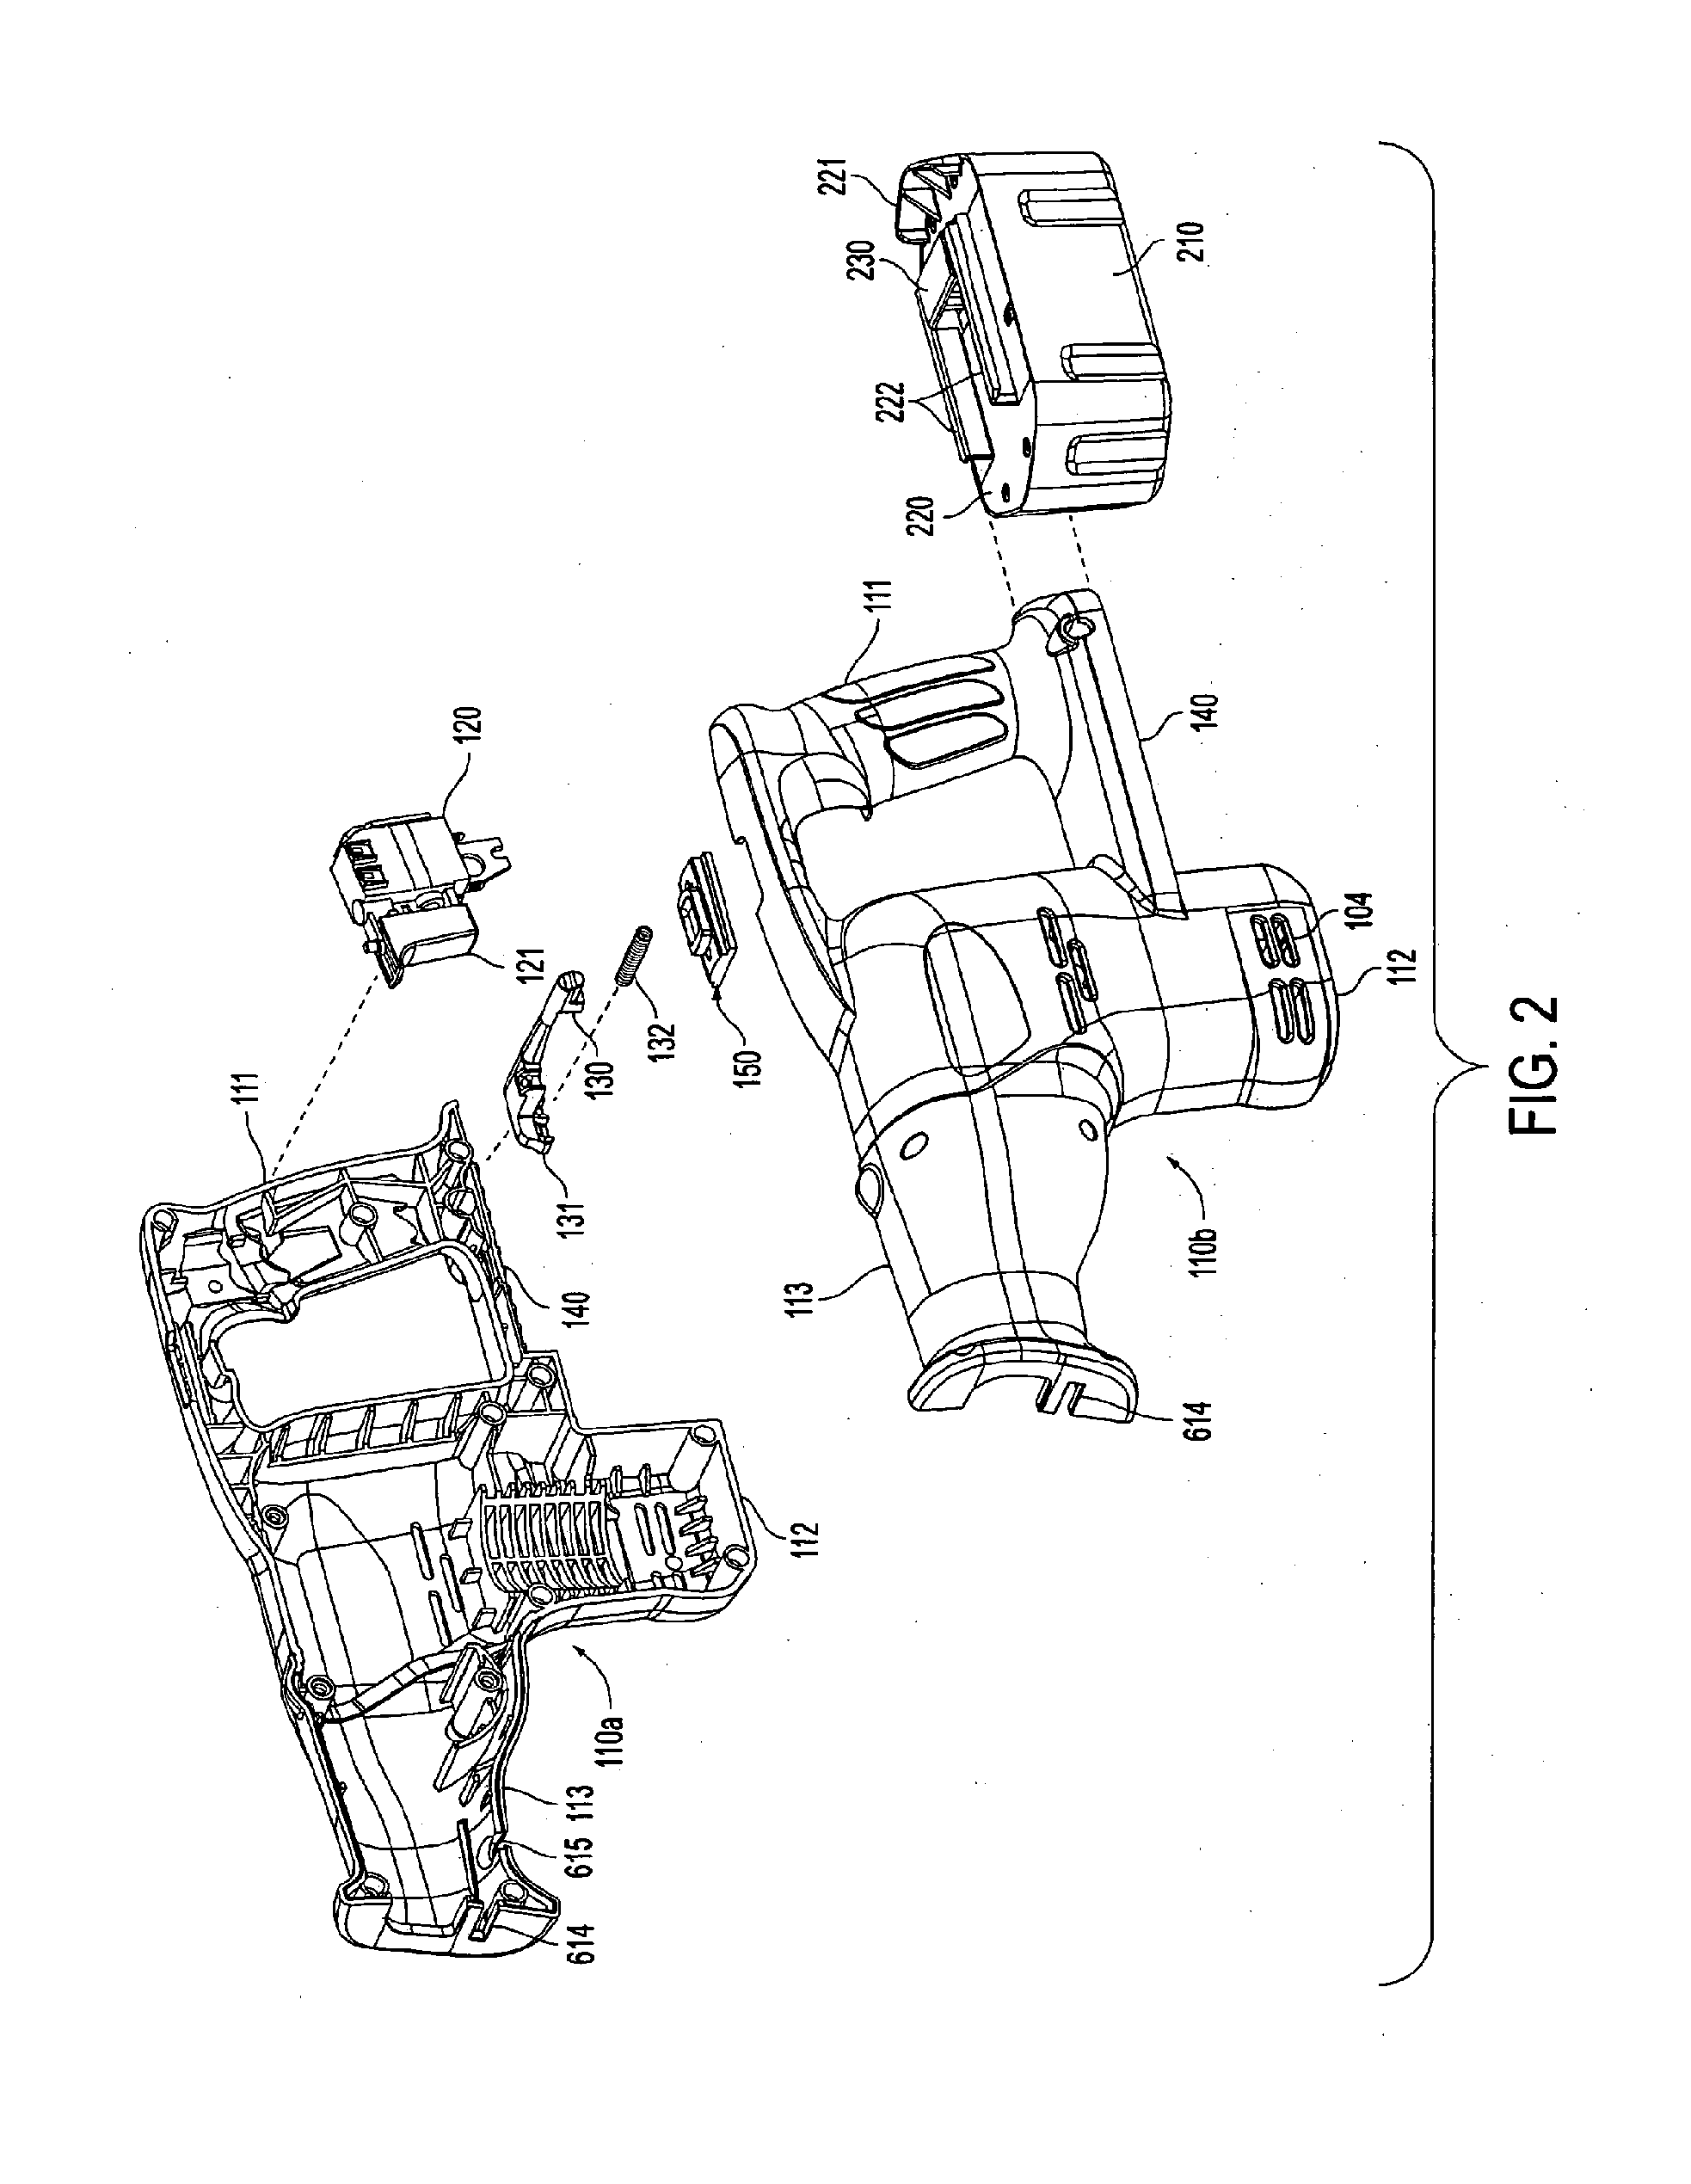 Bearing structure for a reciprocating shaft in a reciprocating saw